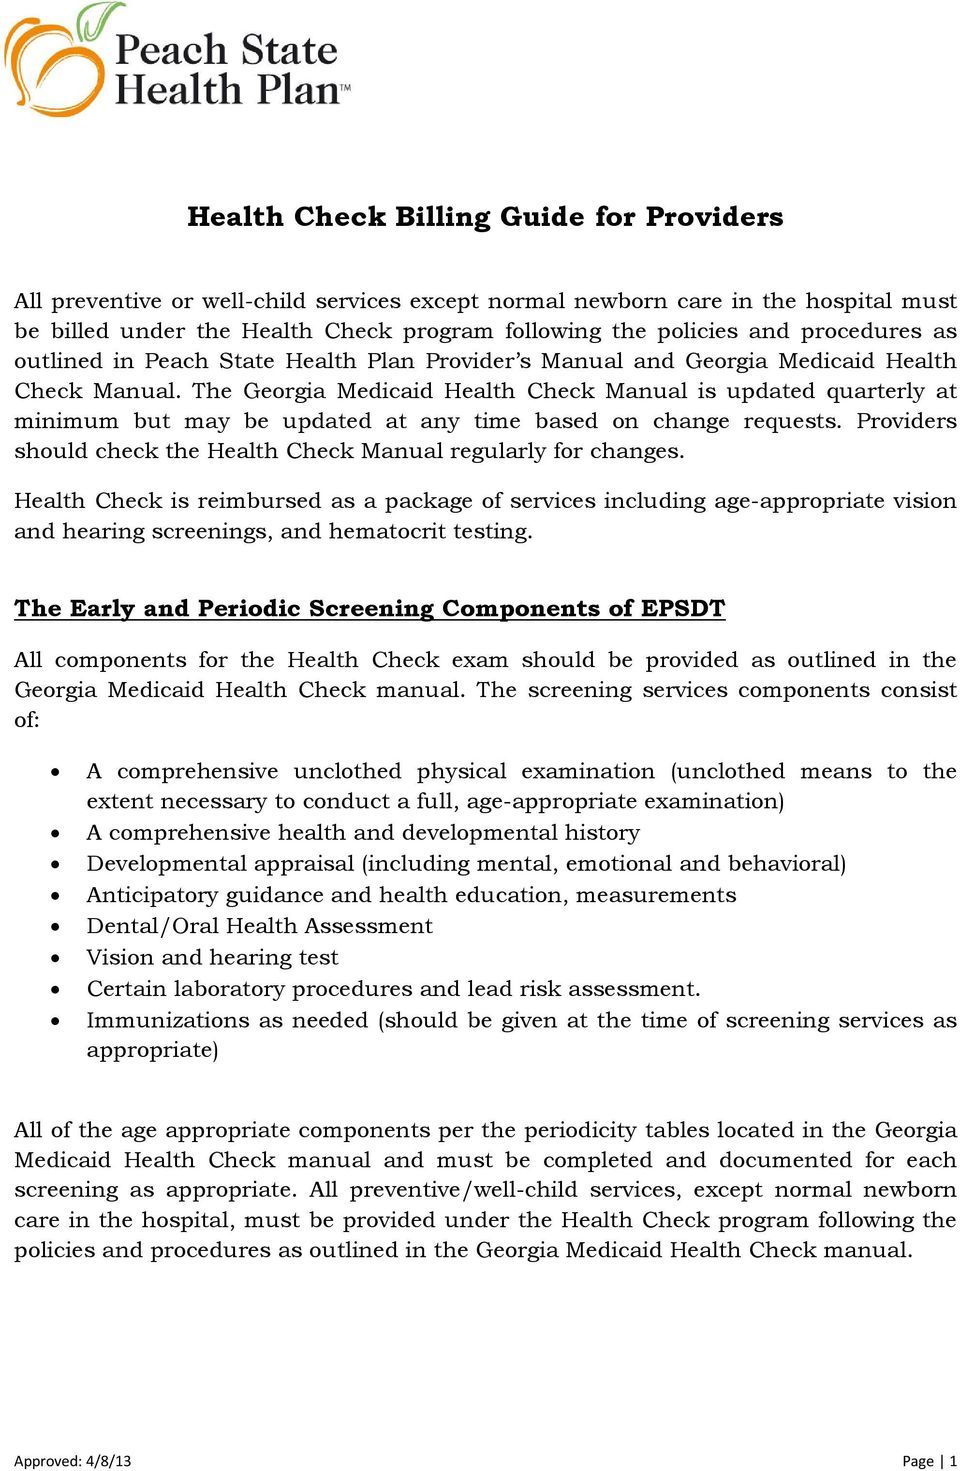 The Georgia Medicaid Health Check Manual is updated quarterly at minimum but may be updated at any time based on change requests. Providers should check the Health Check Manual regularly for changes.